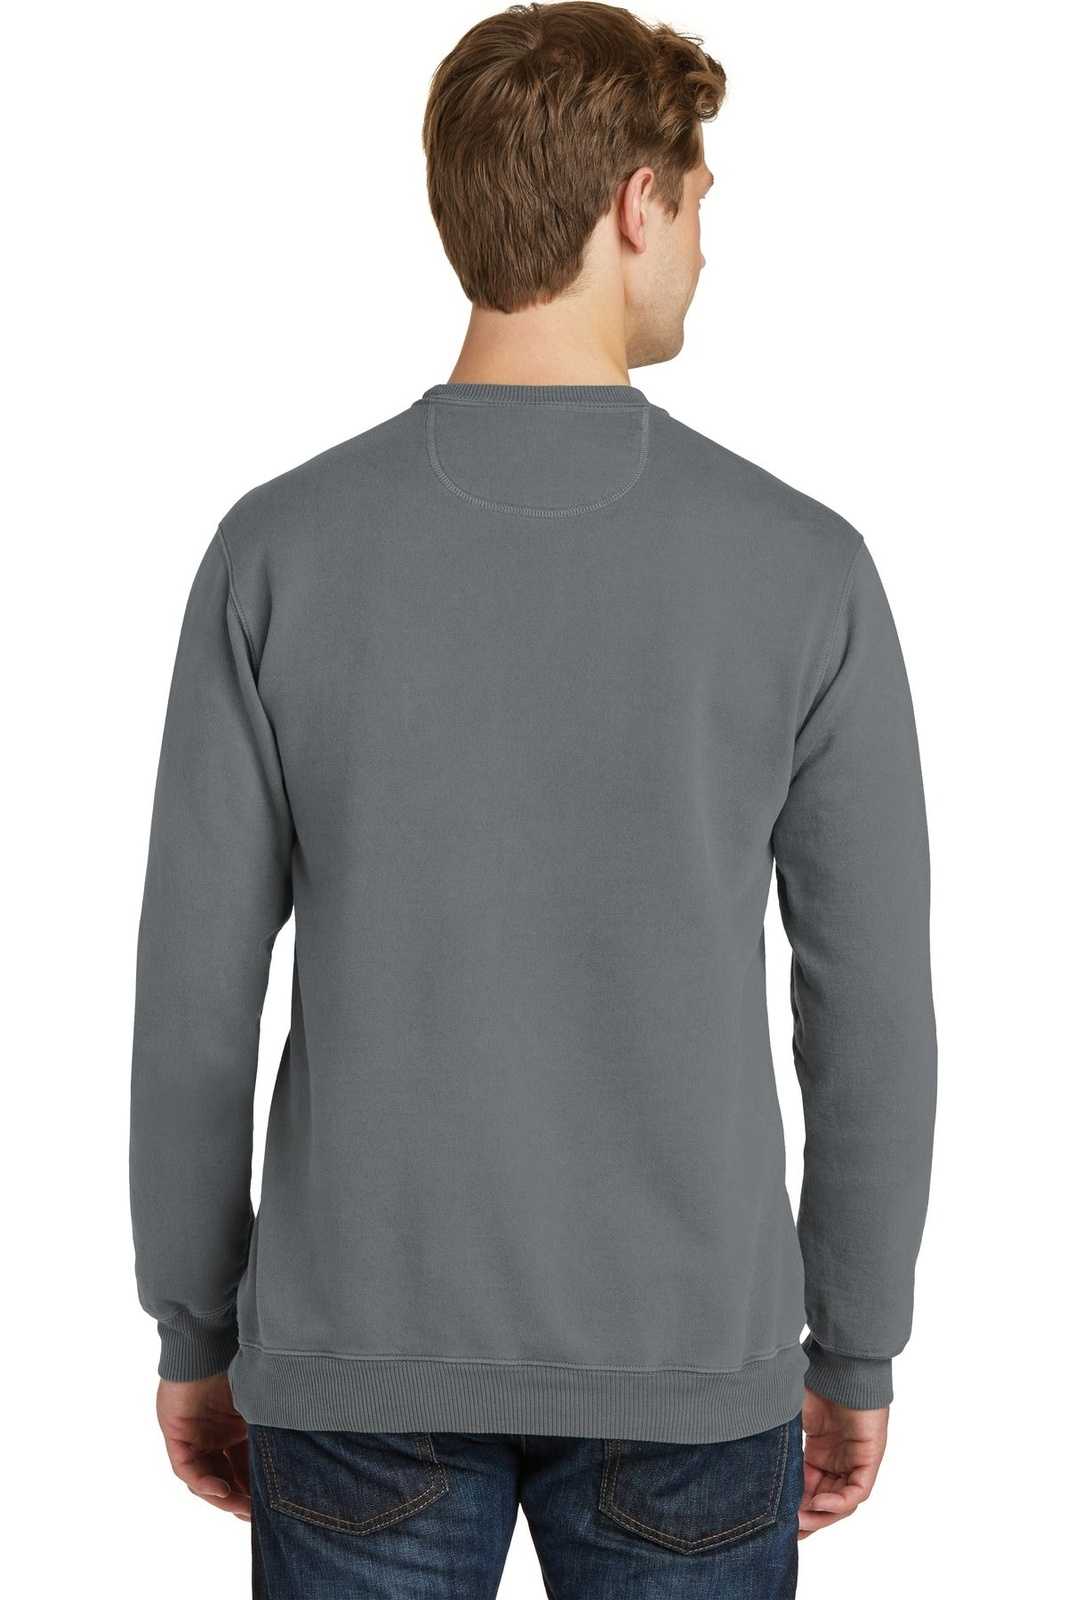 Port & Company PC098 Beach Wash Garment-Dyed Sweatshirt - Pewter - HIT a Double - 1